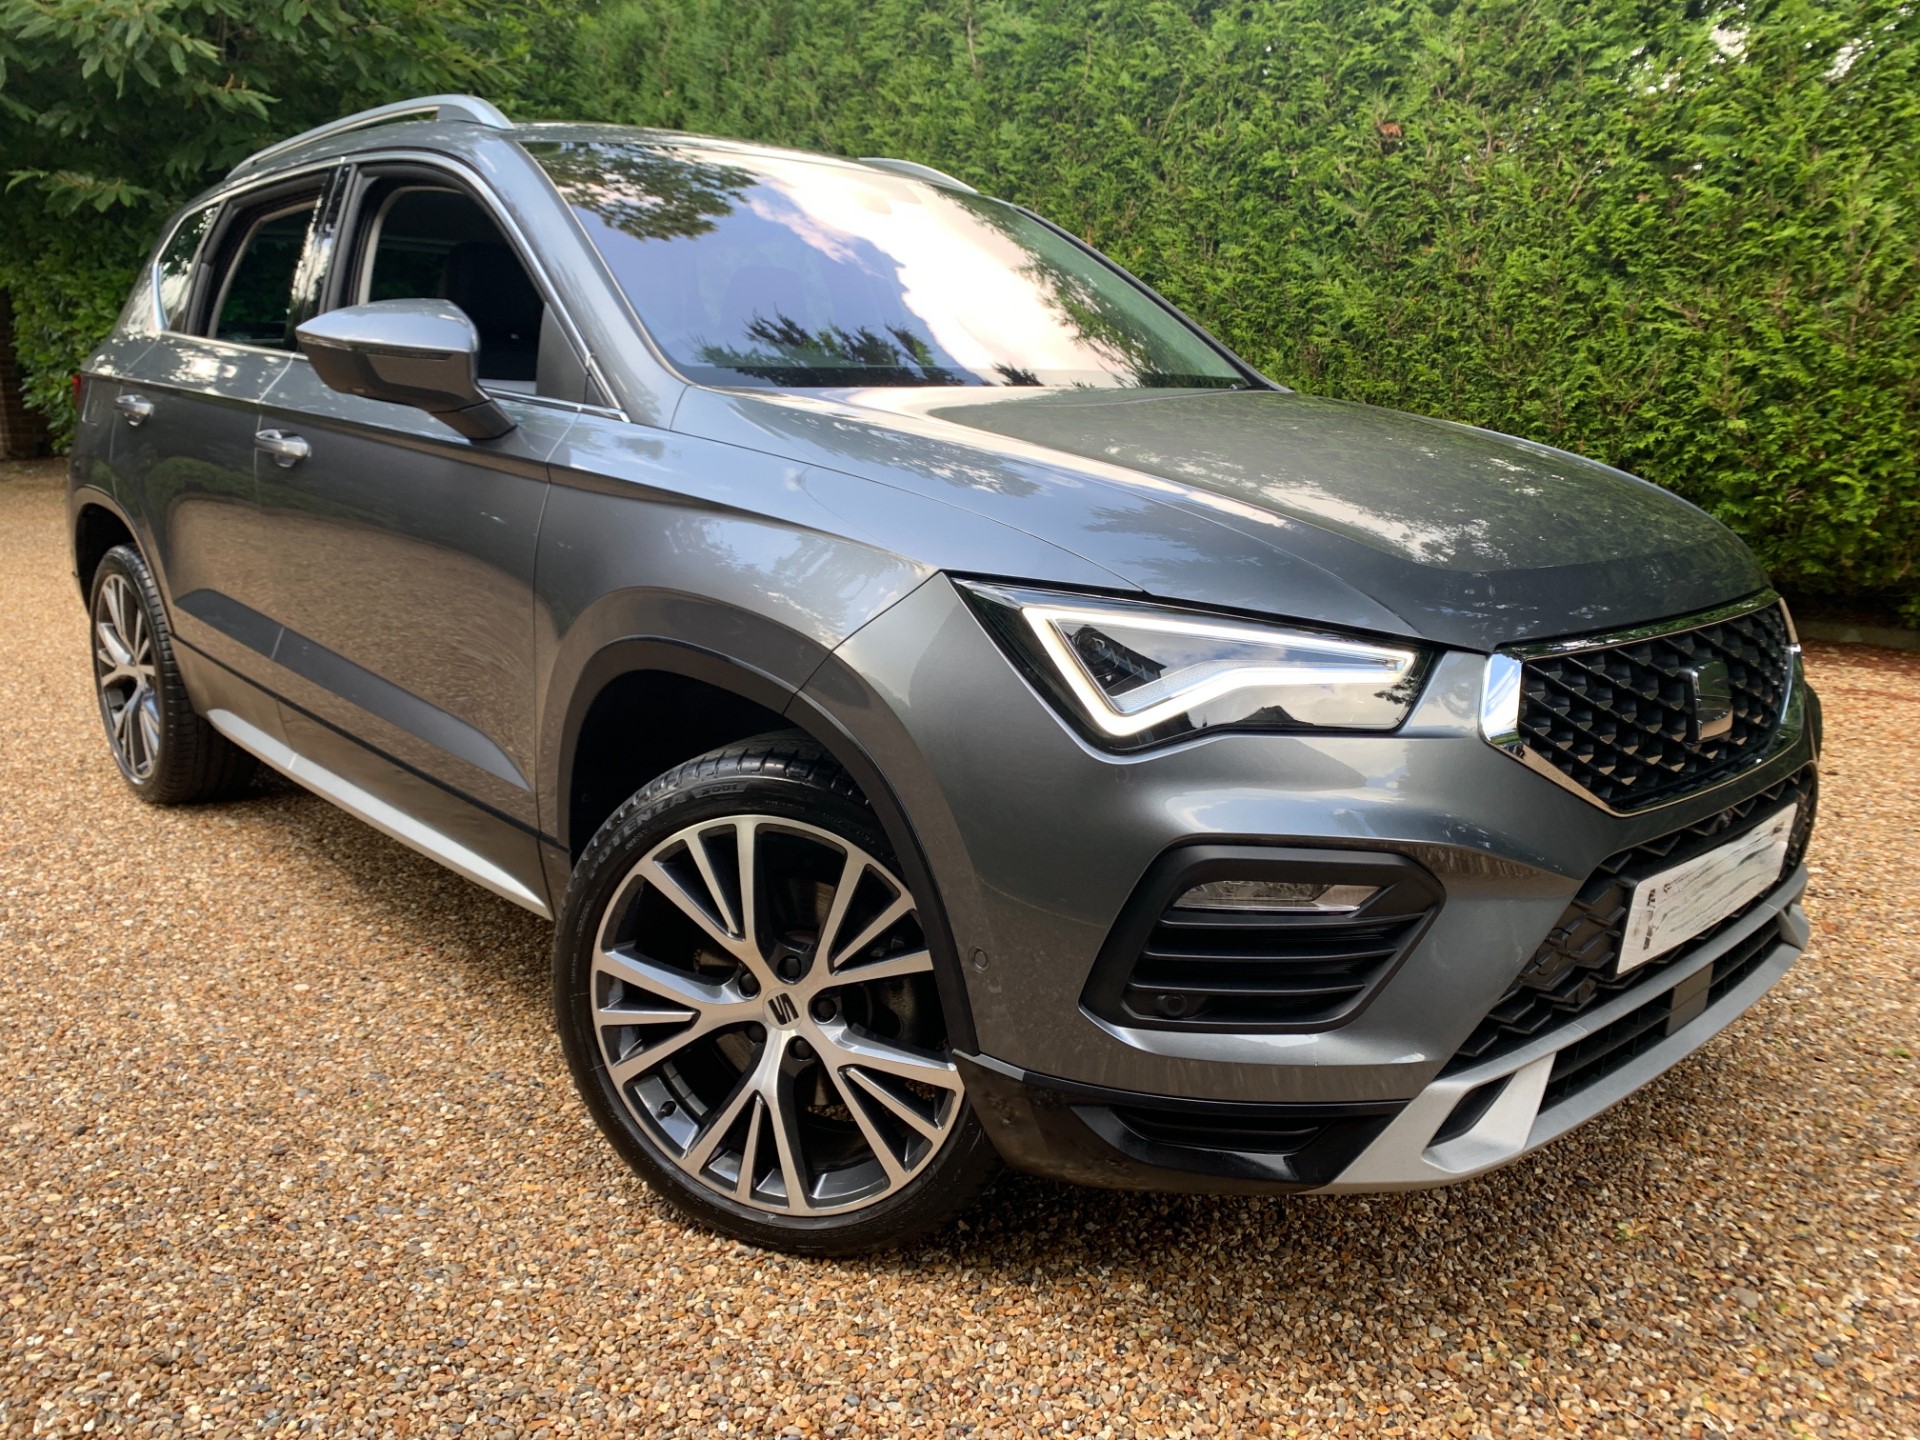 Used SEAT Ateca for sale in Tadworth, Surrey